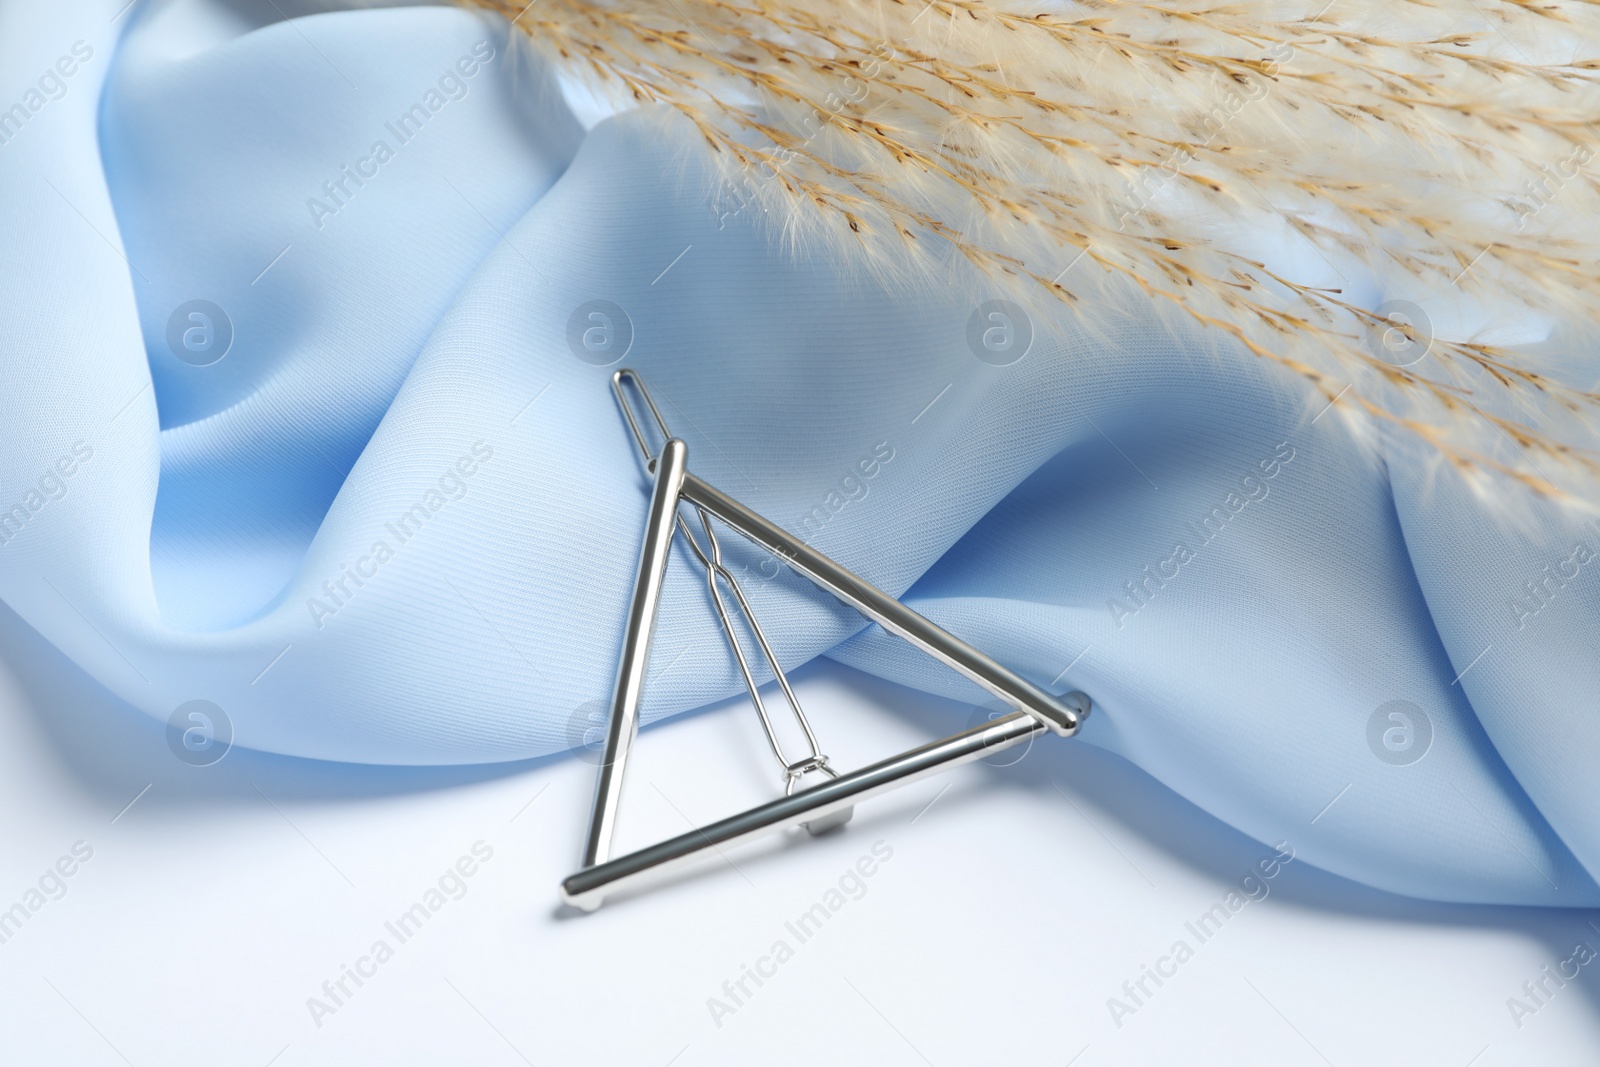 Photo of Stylish hair clip and light blue fabric on white table